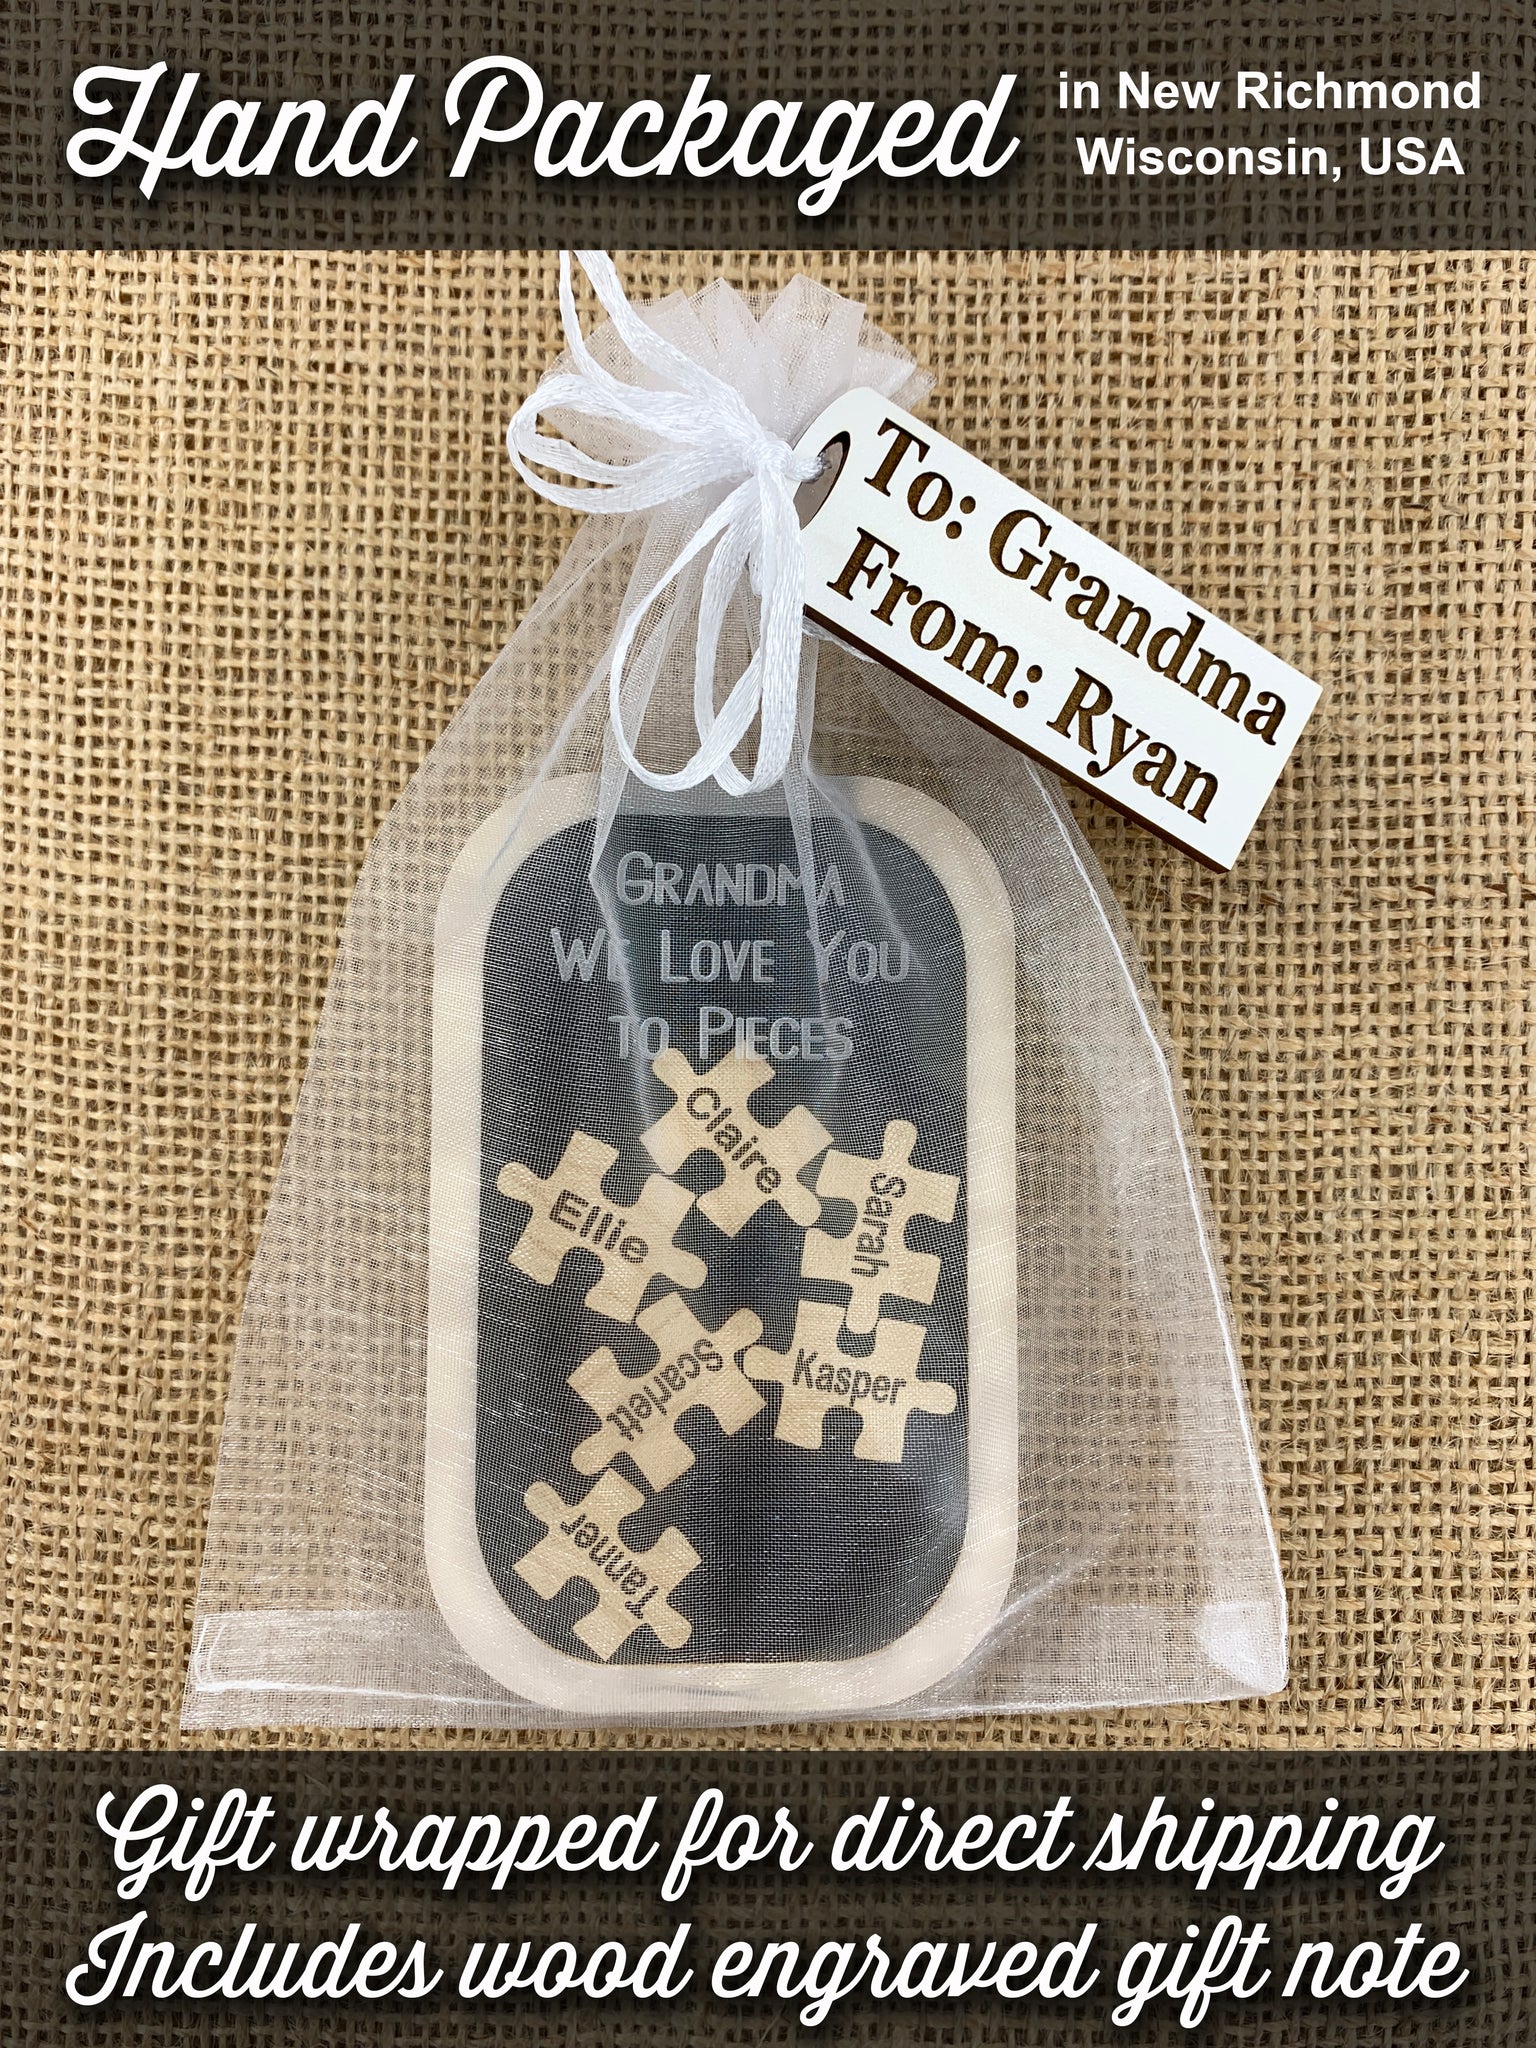 Grandma Gift Personalized Keepsake Cookie Jar Ornament Magnet or Stand Gift  for Grandparents With Grandchildren's Names on Cookies Christmas 